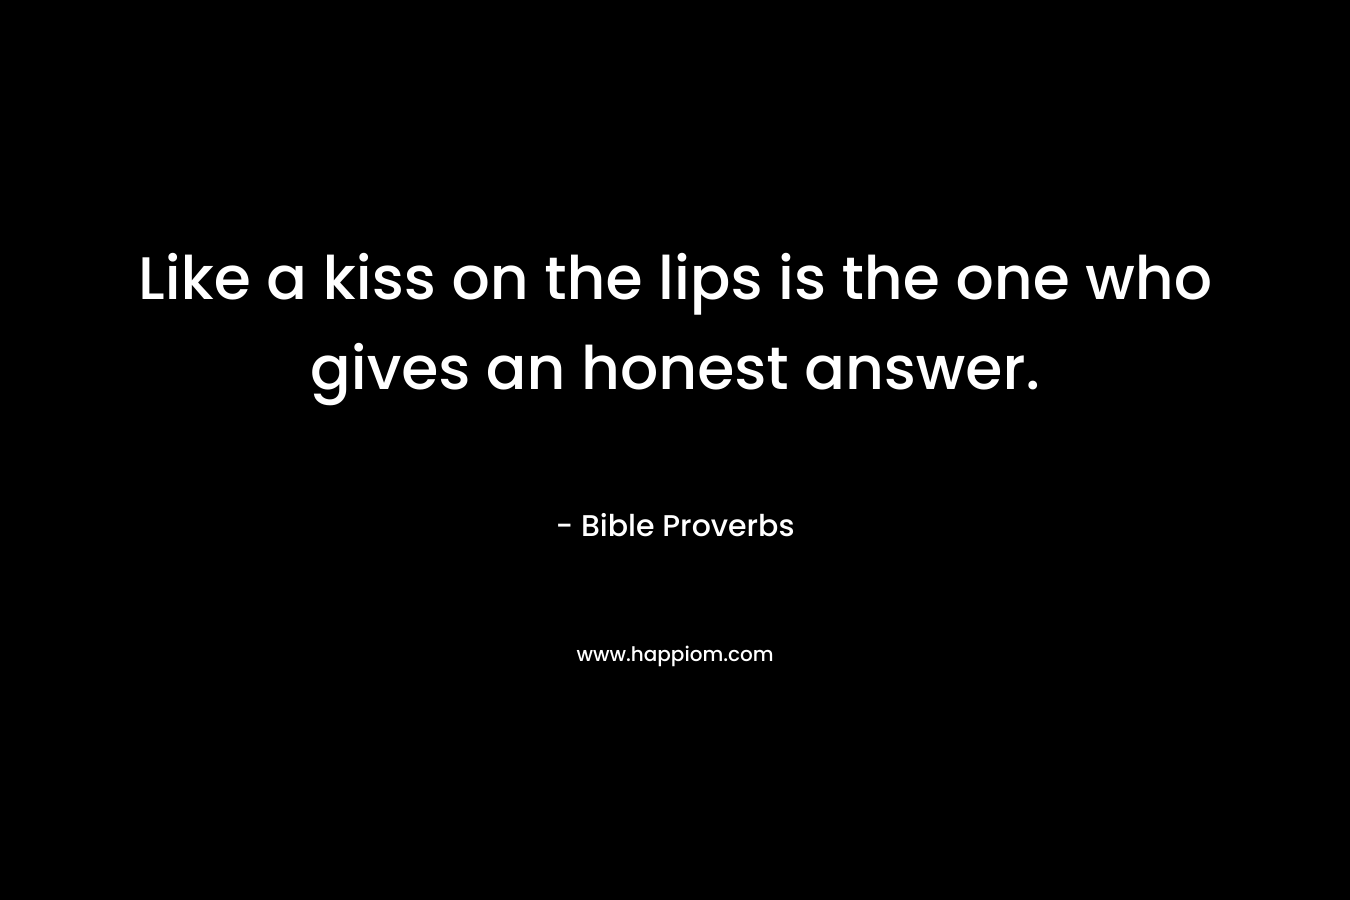 Like a kiss on the lips is the one who gives an honest answer.